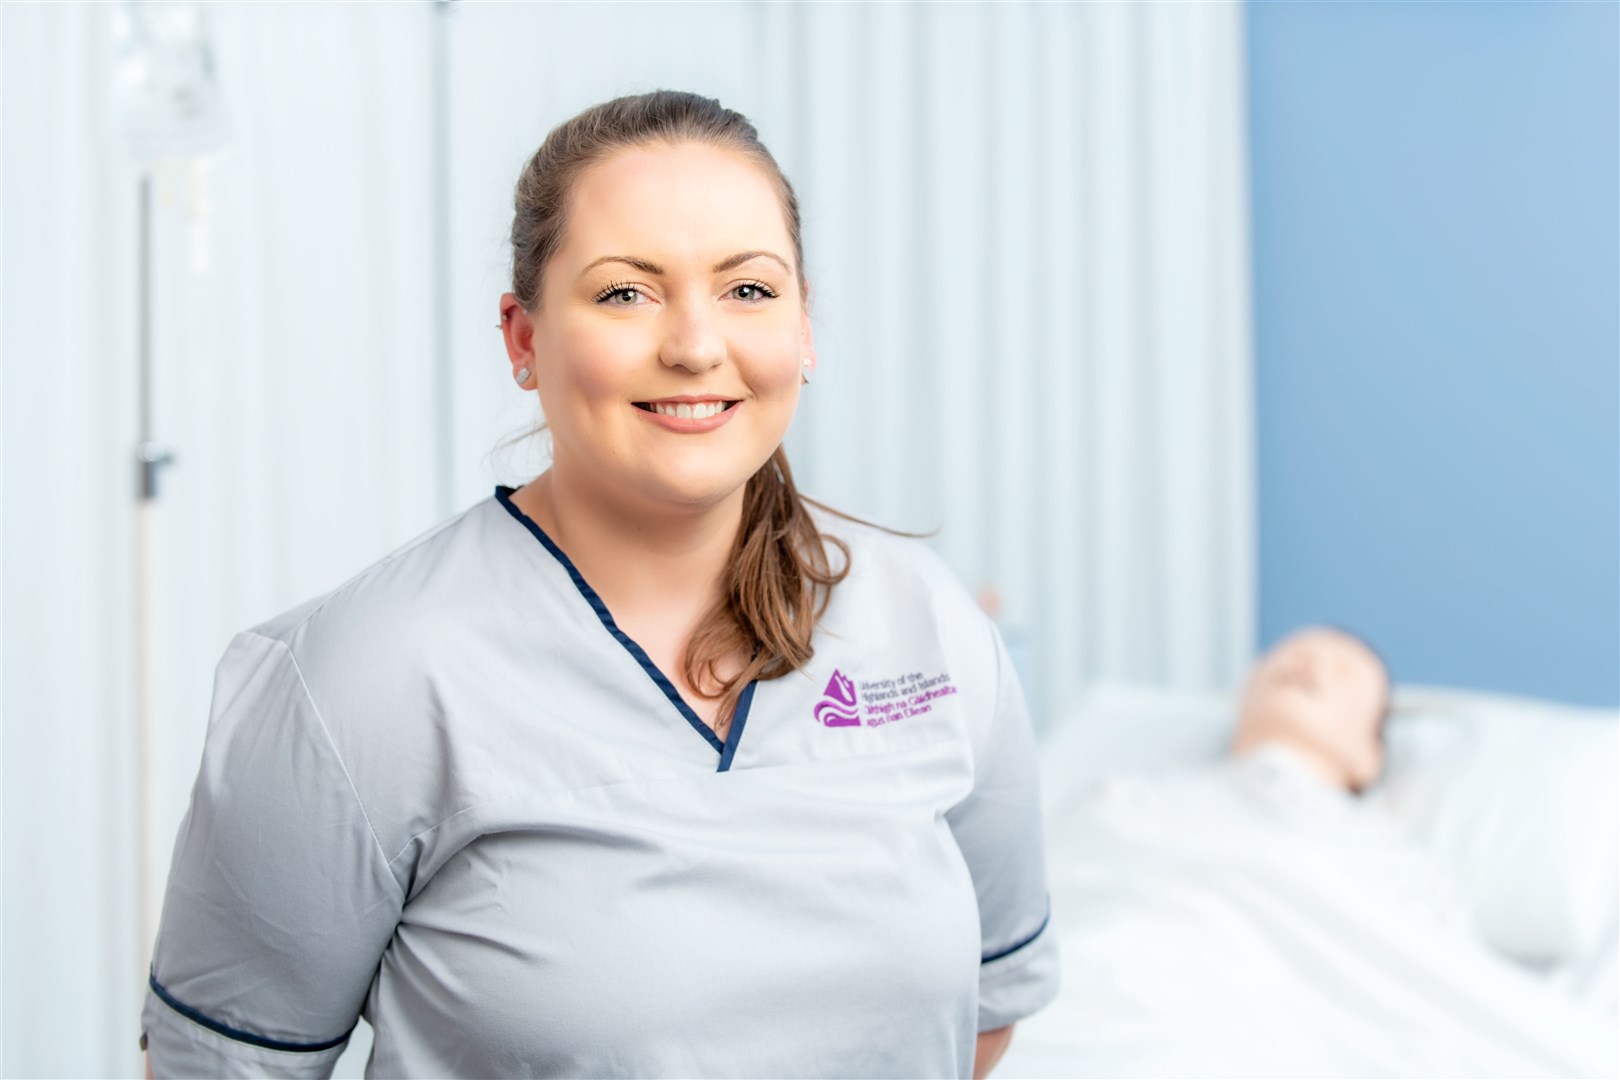 BA adult nursing student Emilie Quine is one of only 50 students across the UK selected for the course.